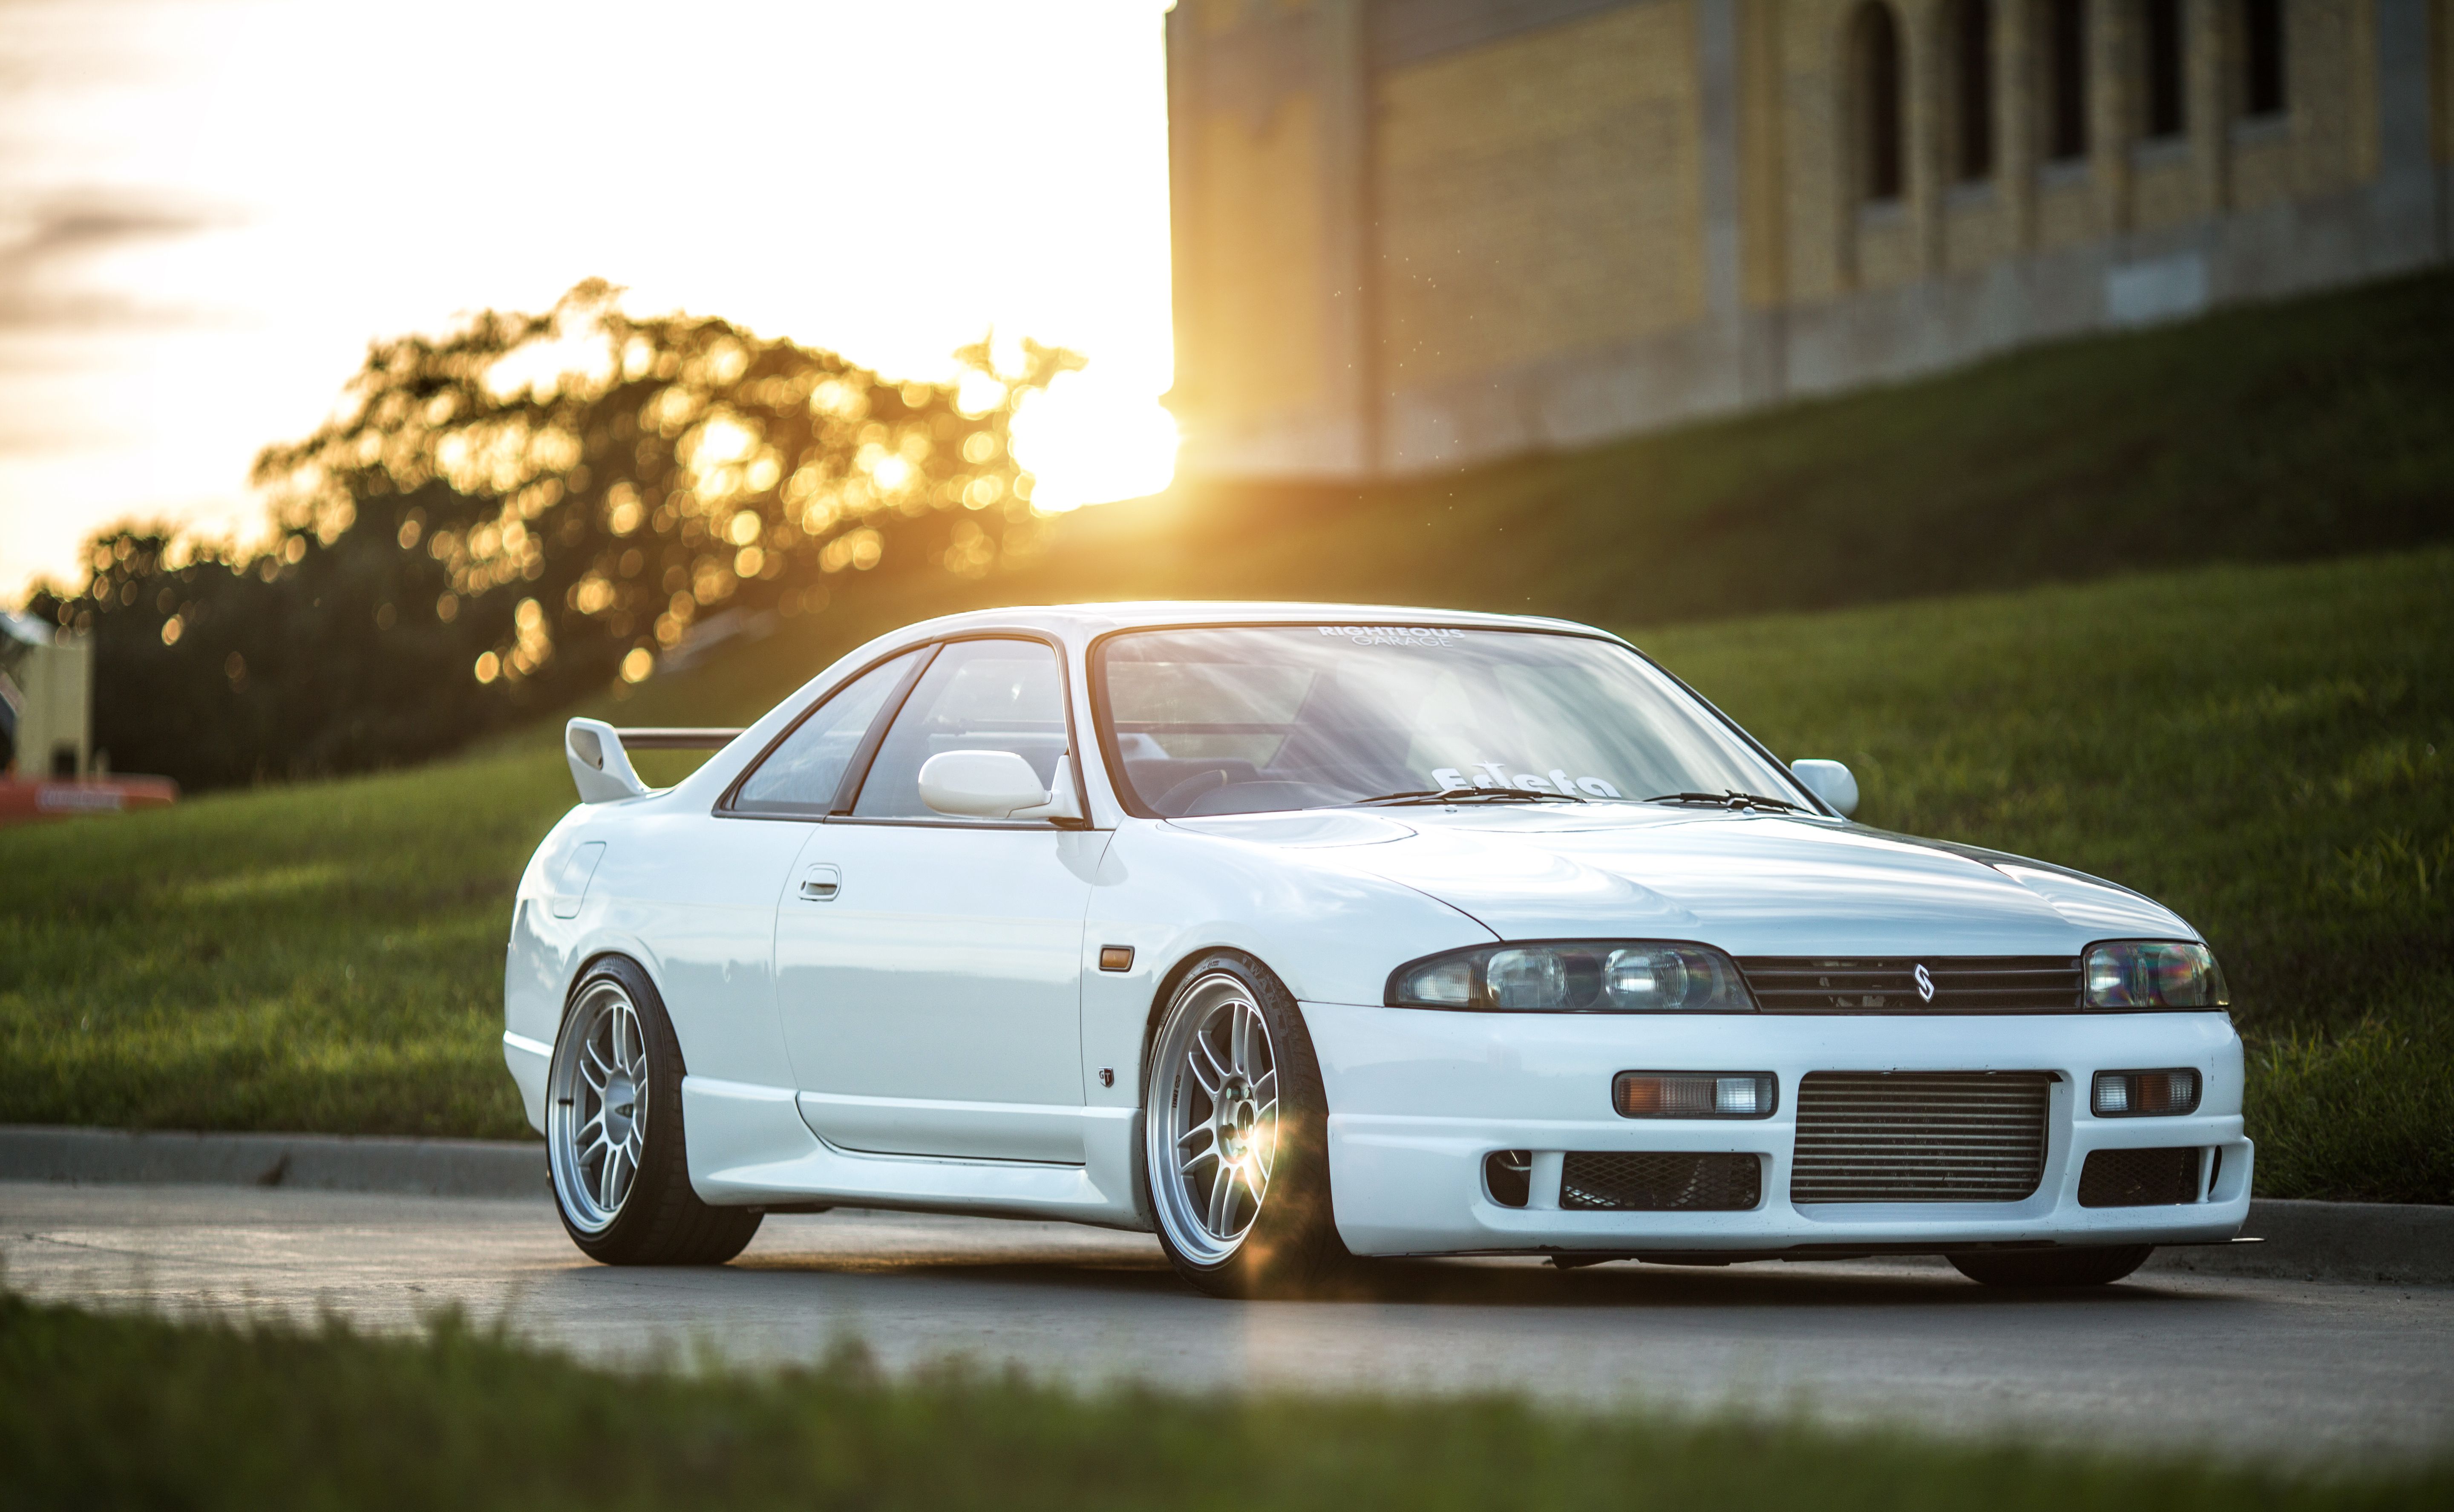 R33 Skyline Wallpapers posted by John Walker.